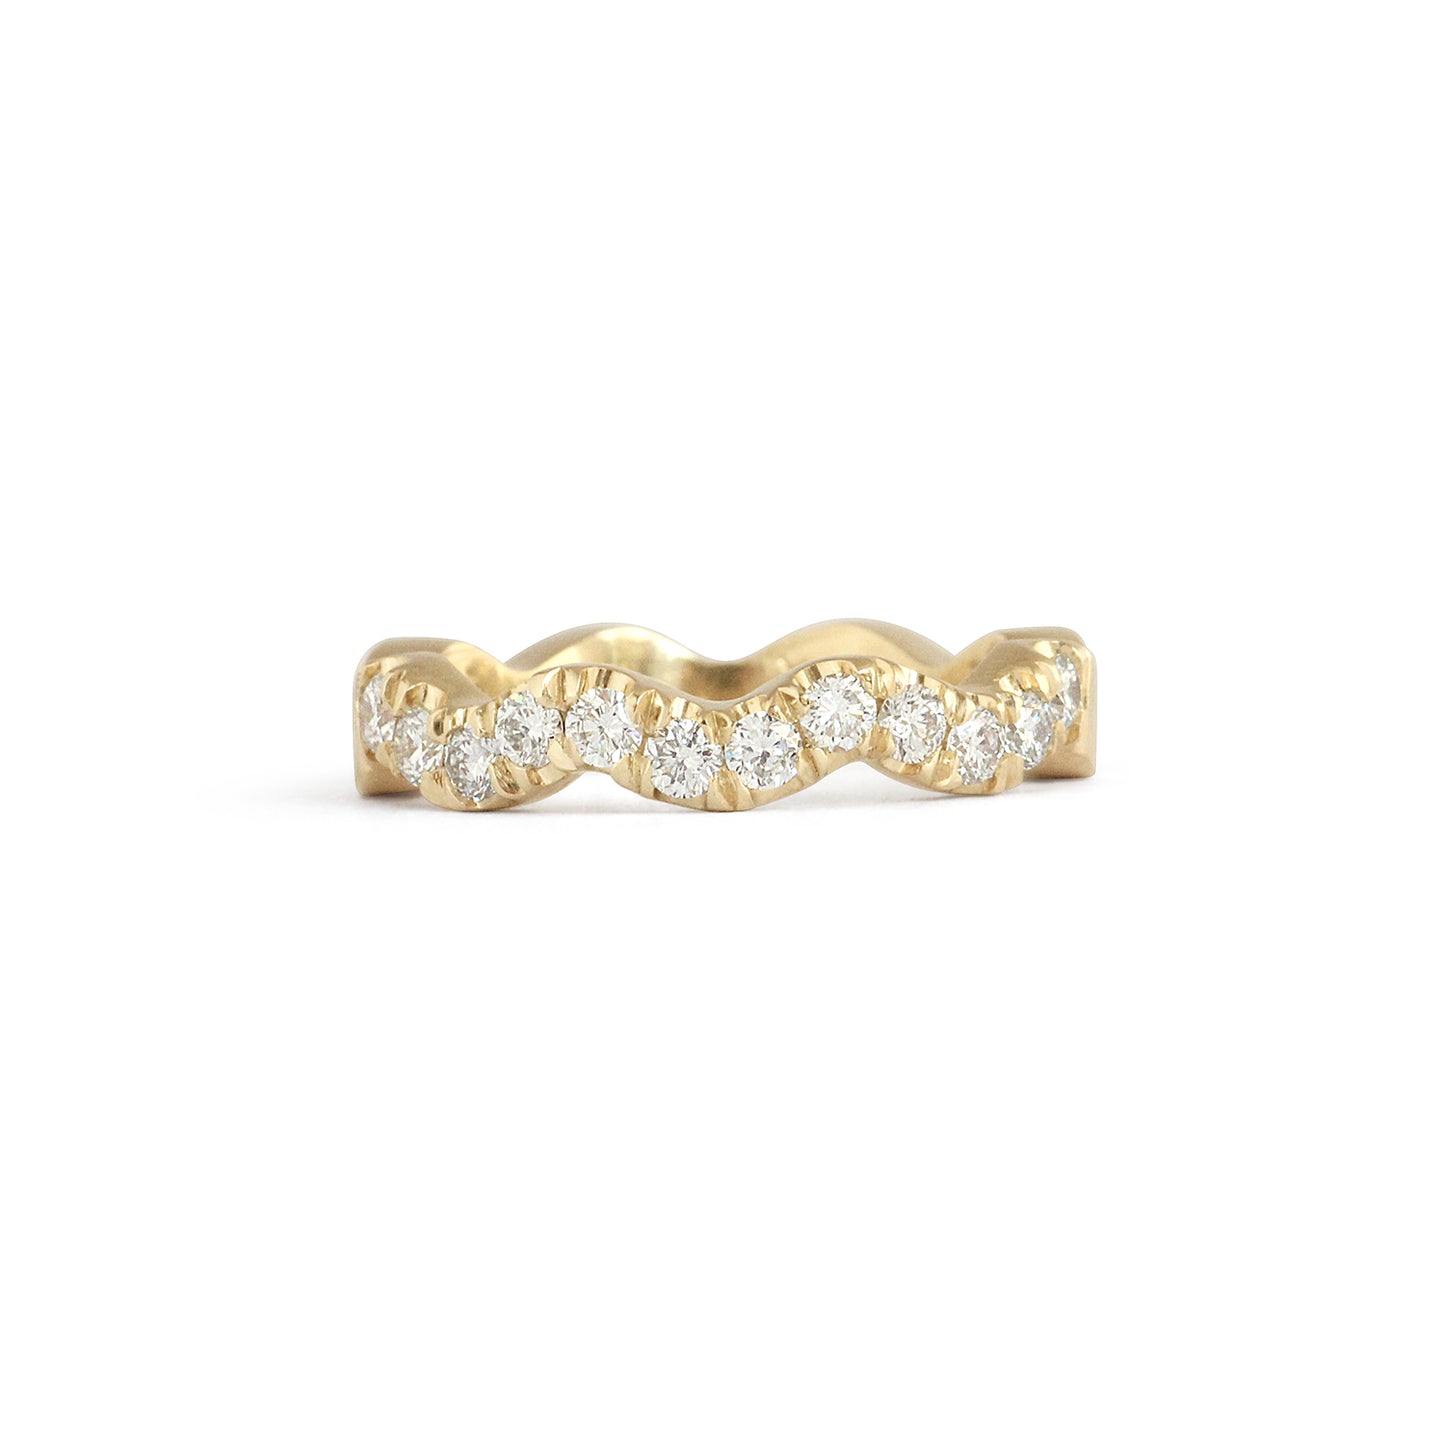 Waves Band / Medium + Diamonds by Goldpoint